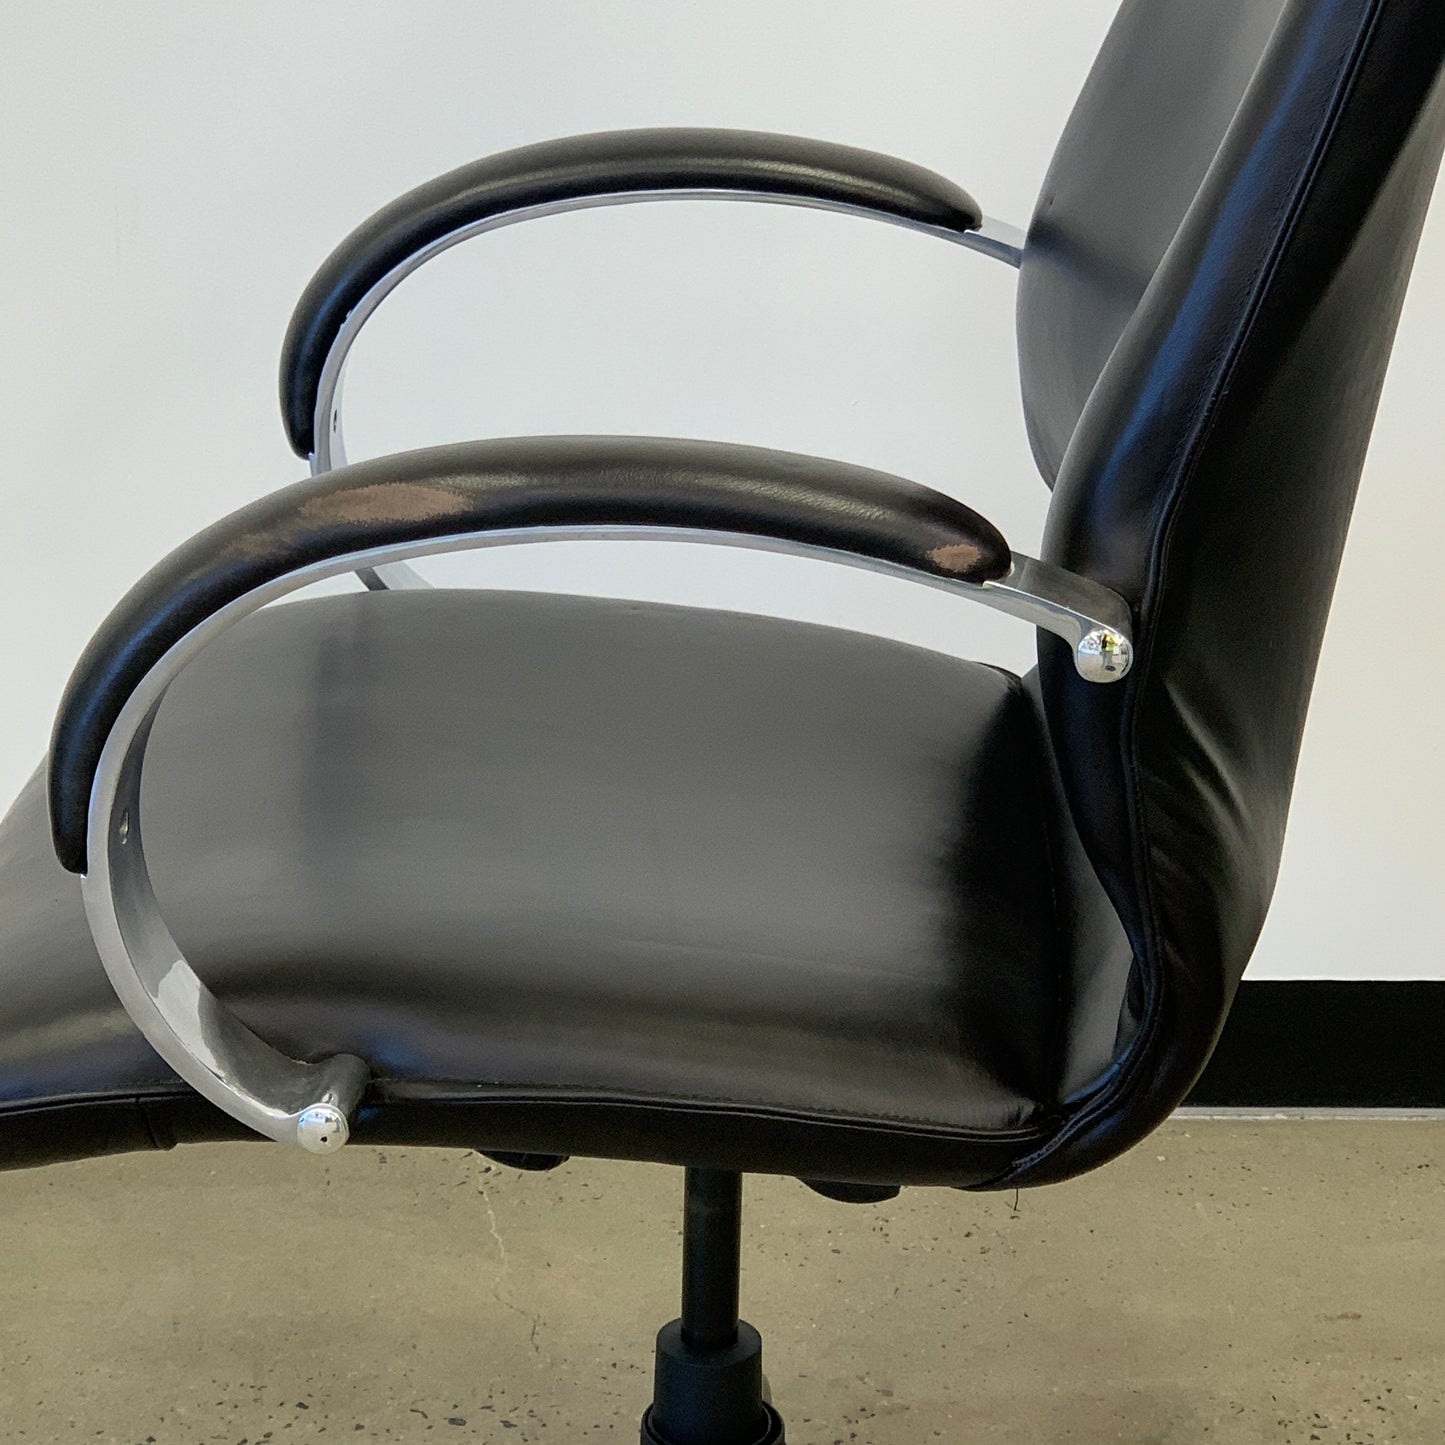 Executive Chair Black Leather